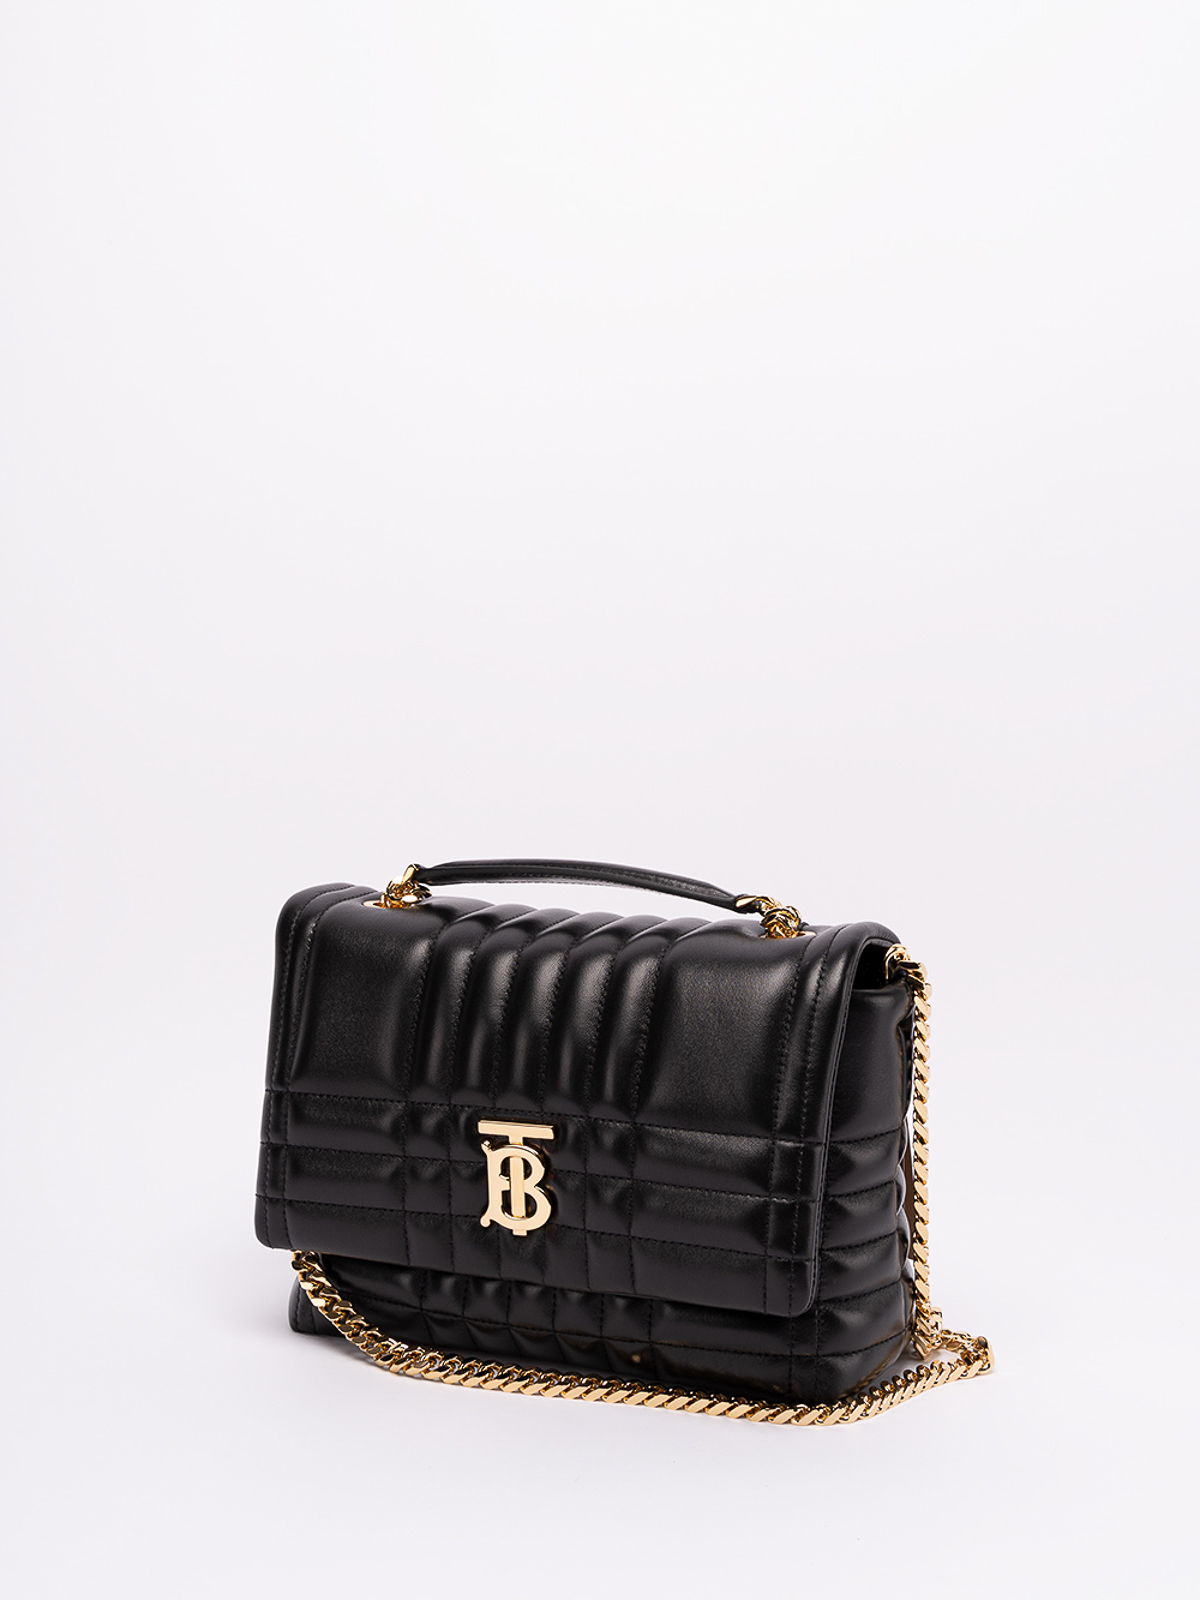 quilted leather small Lola bag, Burberry